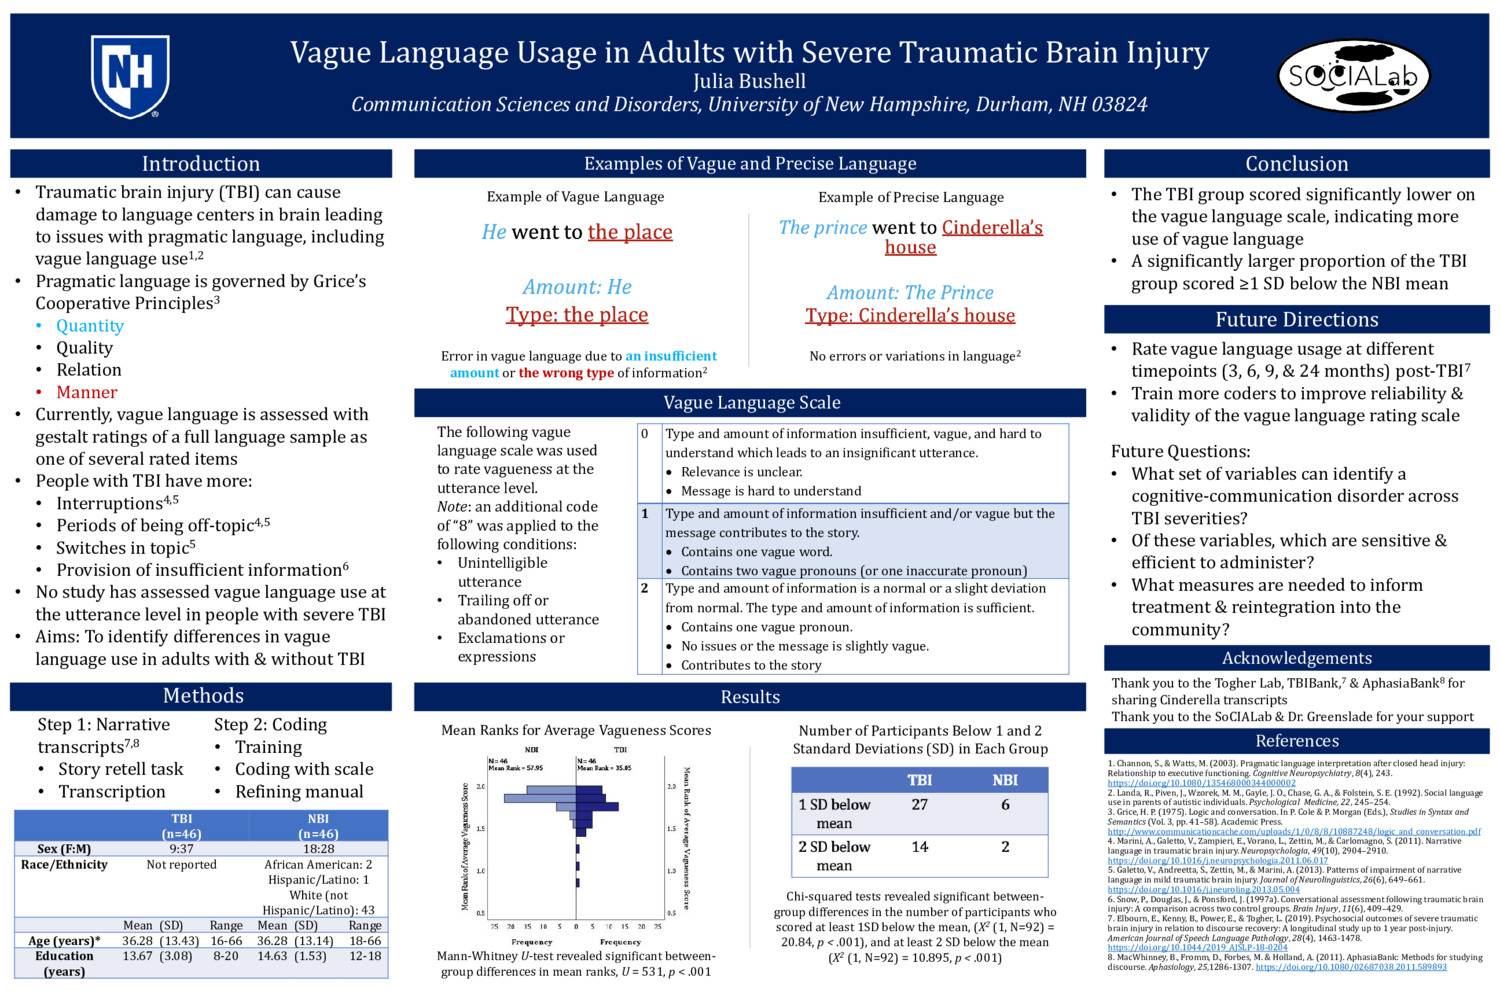 Vague Language Usage In Adults With Severe Traumatic Brain Injury by kg1111